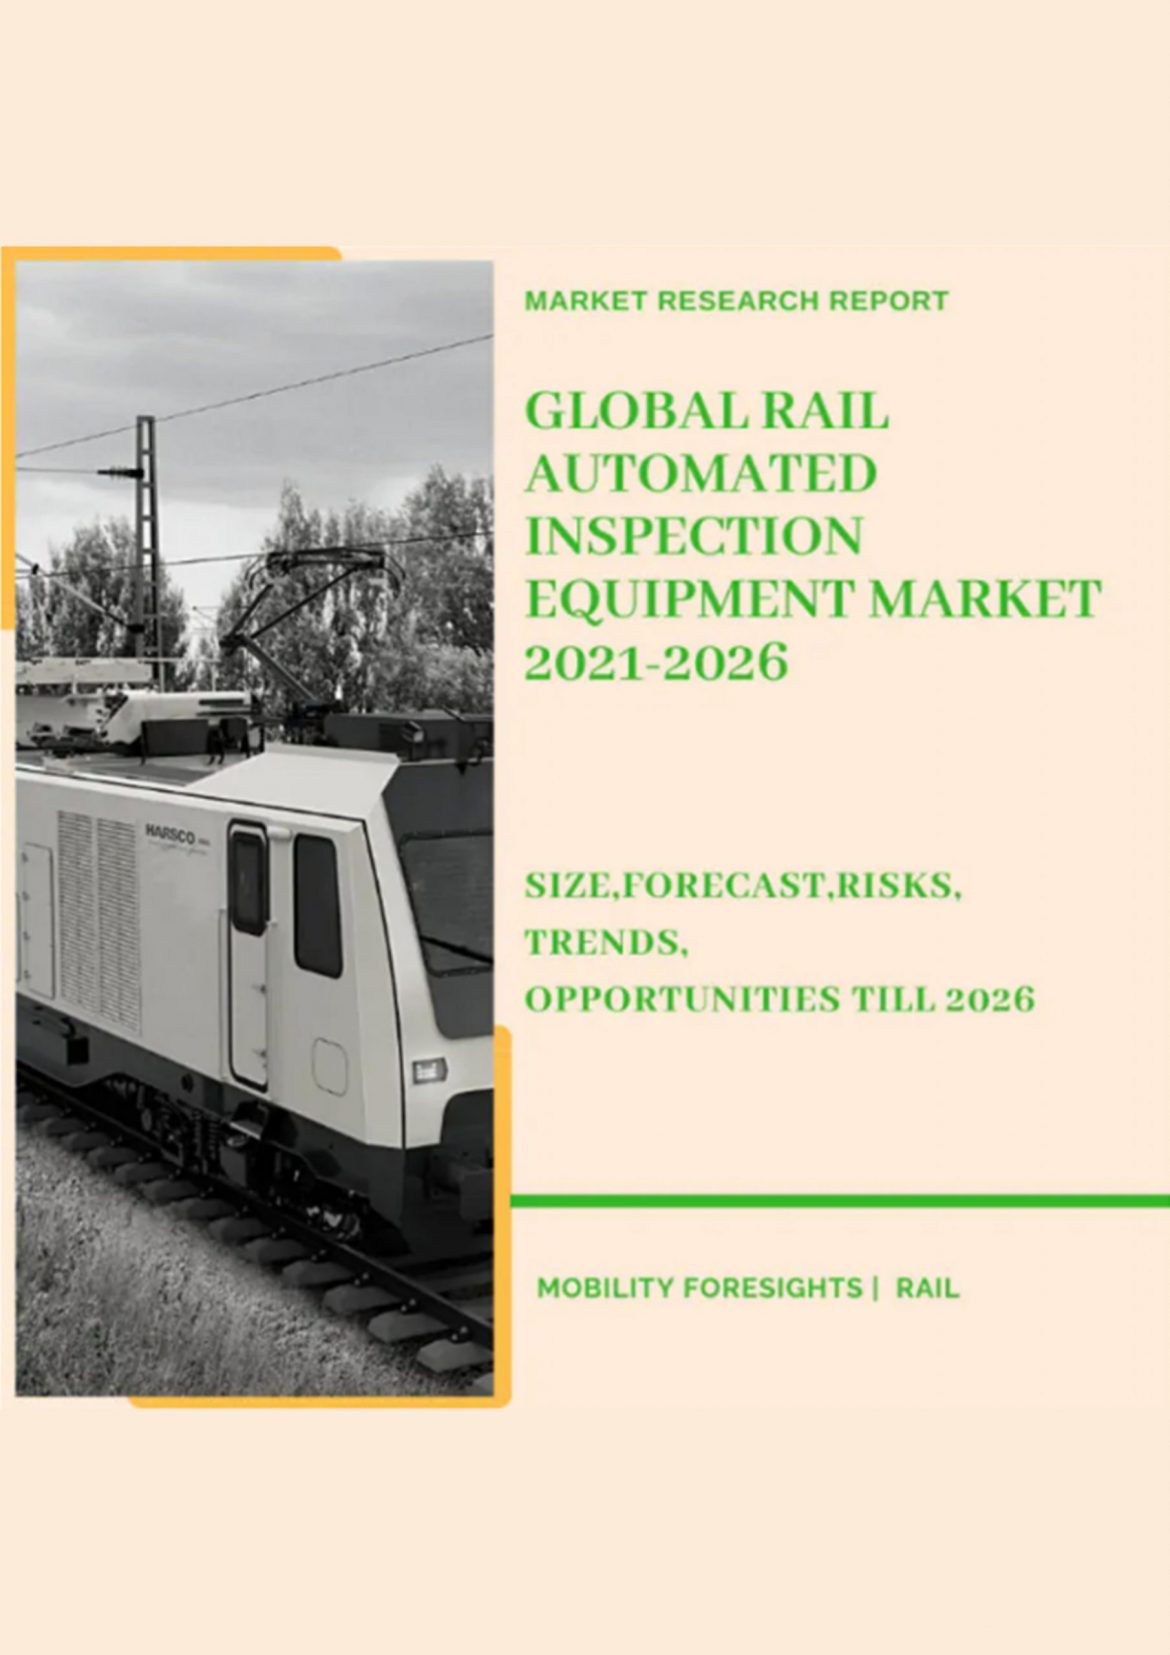 Global Rail Automated Inspection Equipment Market 2021-2026